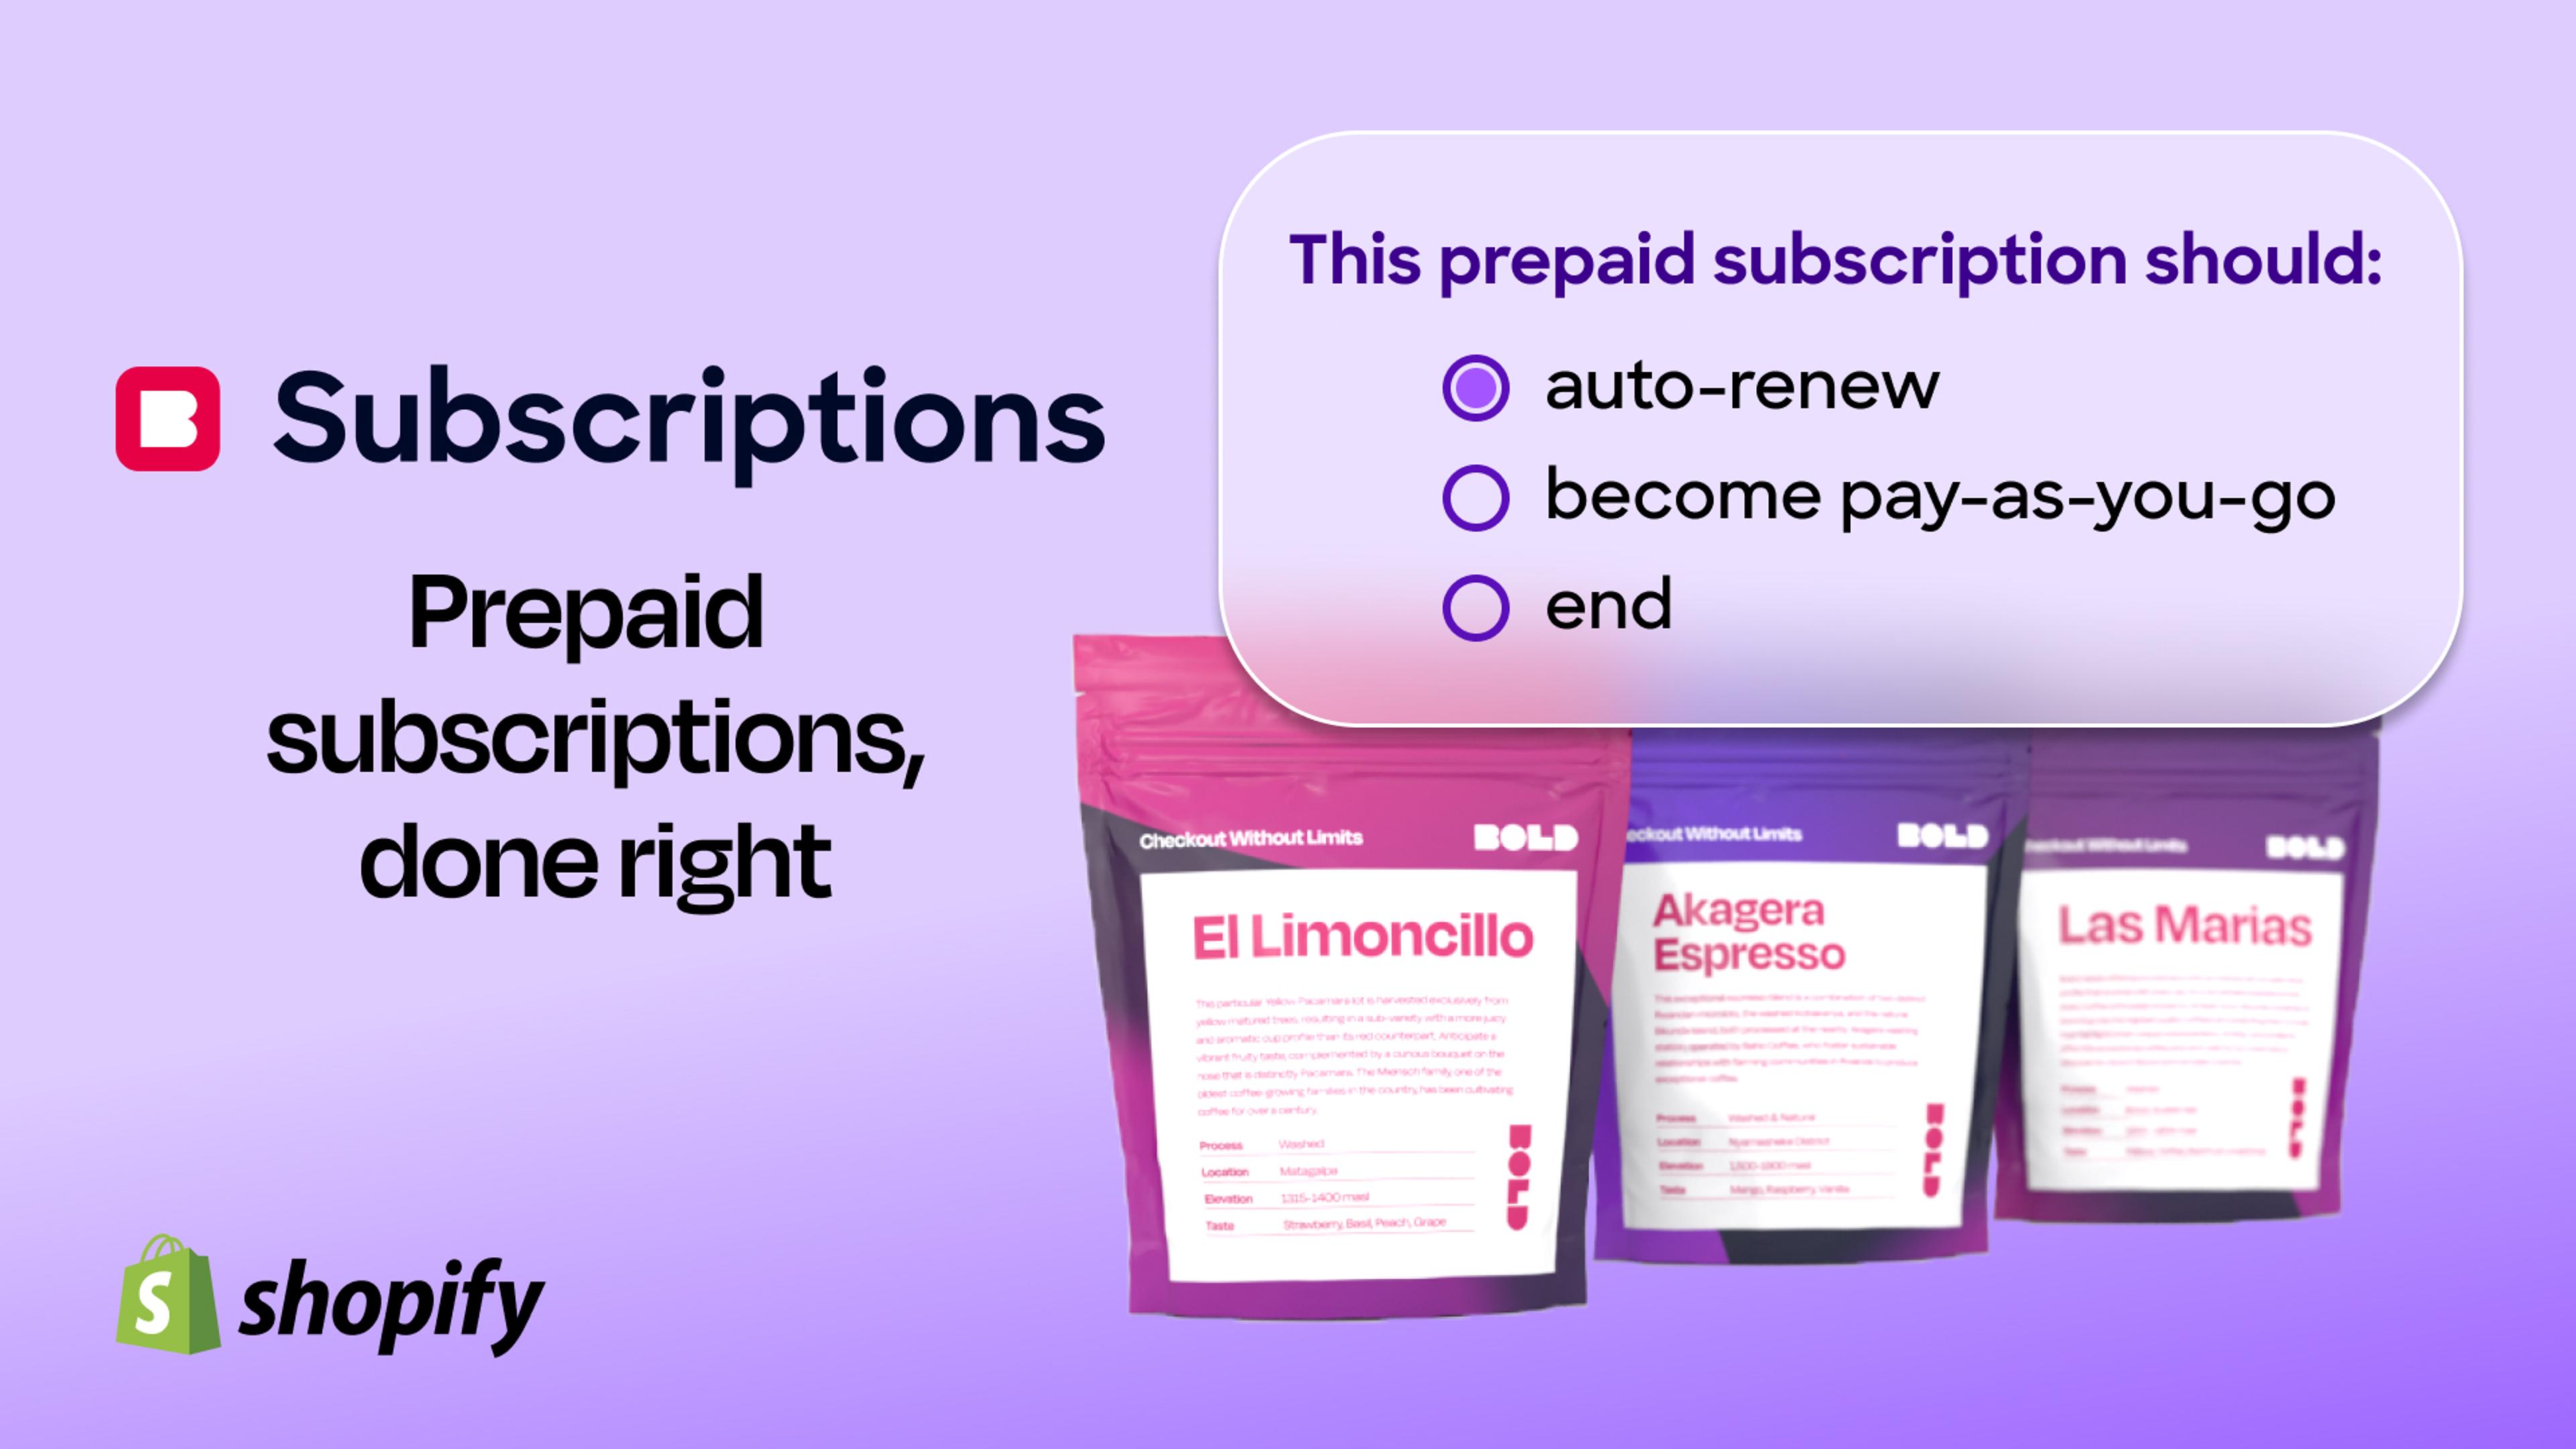 Image depicts a prepaid subscription that can auto-renew, become pay-as-you-go, or end